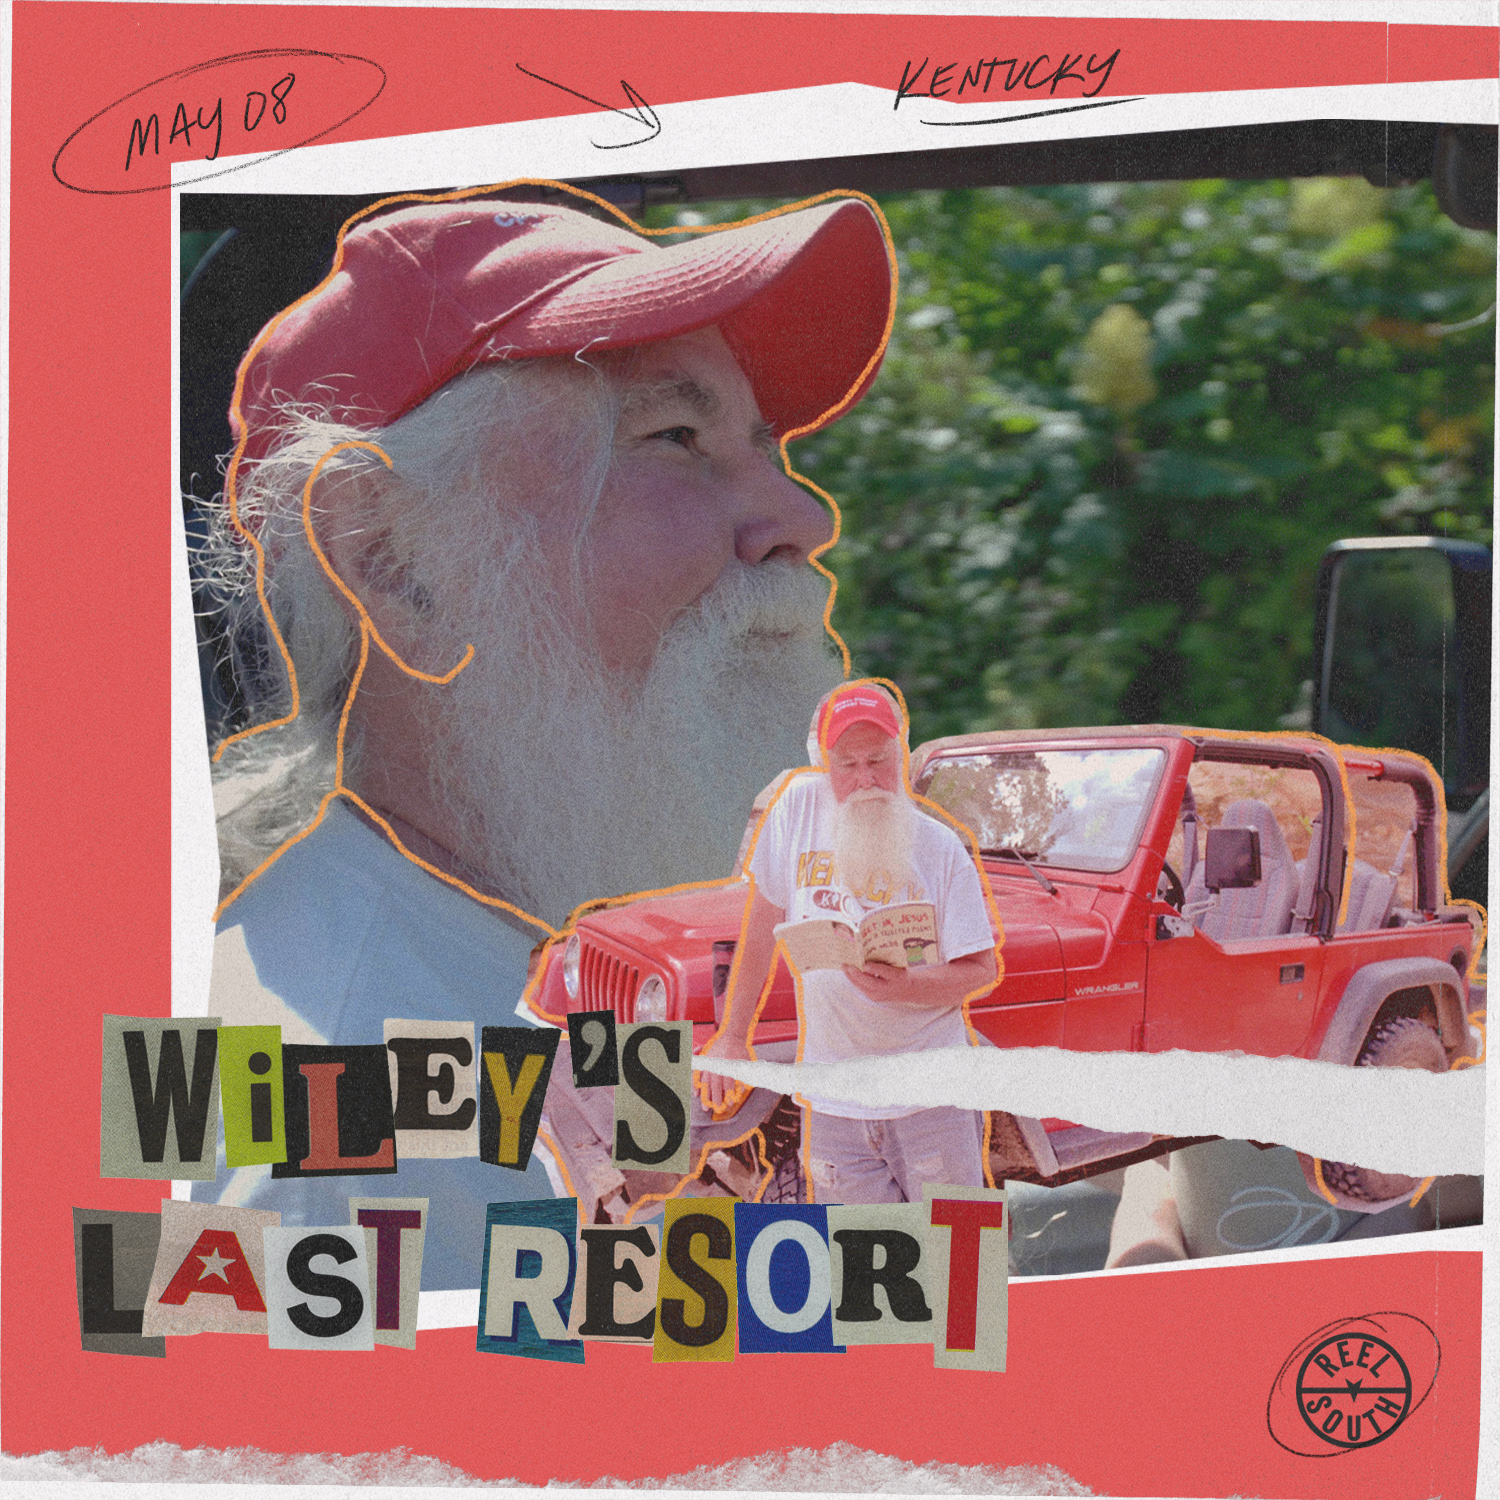 A promotional image for the film "Wiley's Last Resort." It pictures Jim Webb's profile against the green outdoors, with his red truck in the foreground.